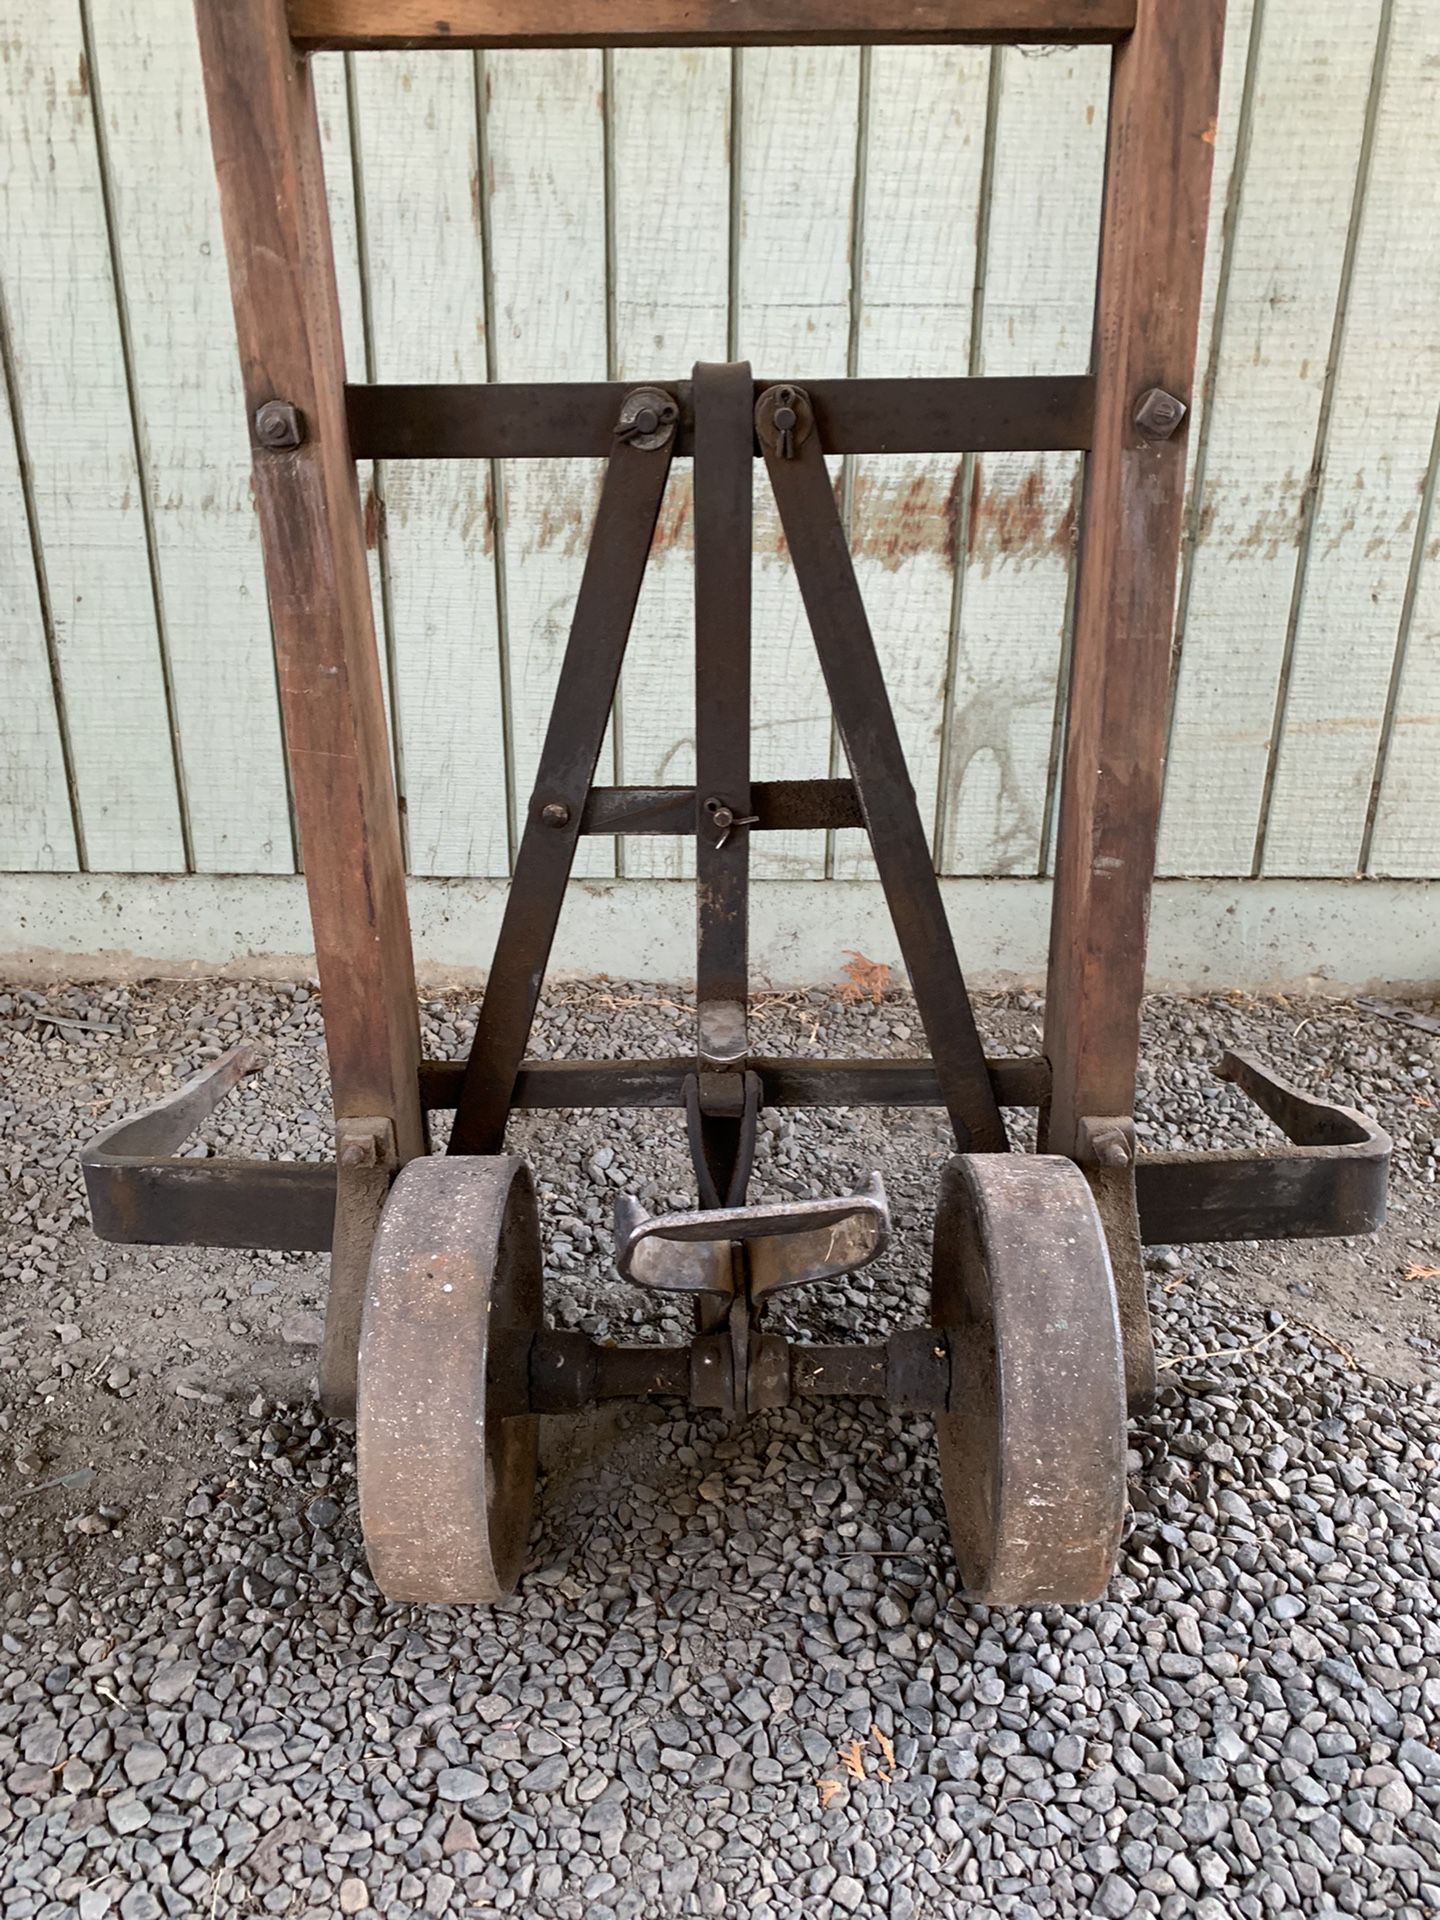 Beautiful Working California Iron Works Pedal Claw Handtruck